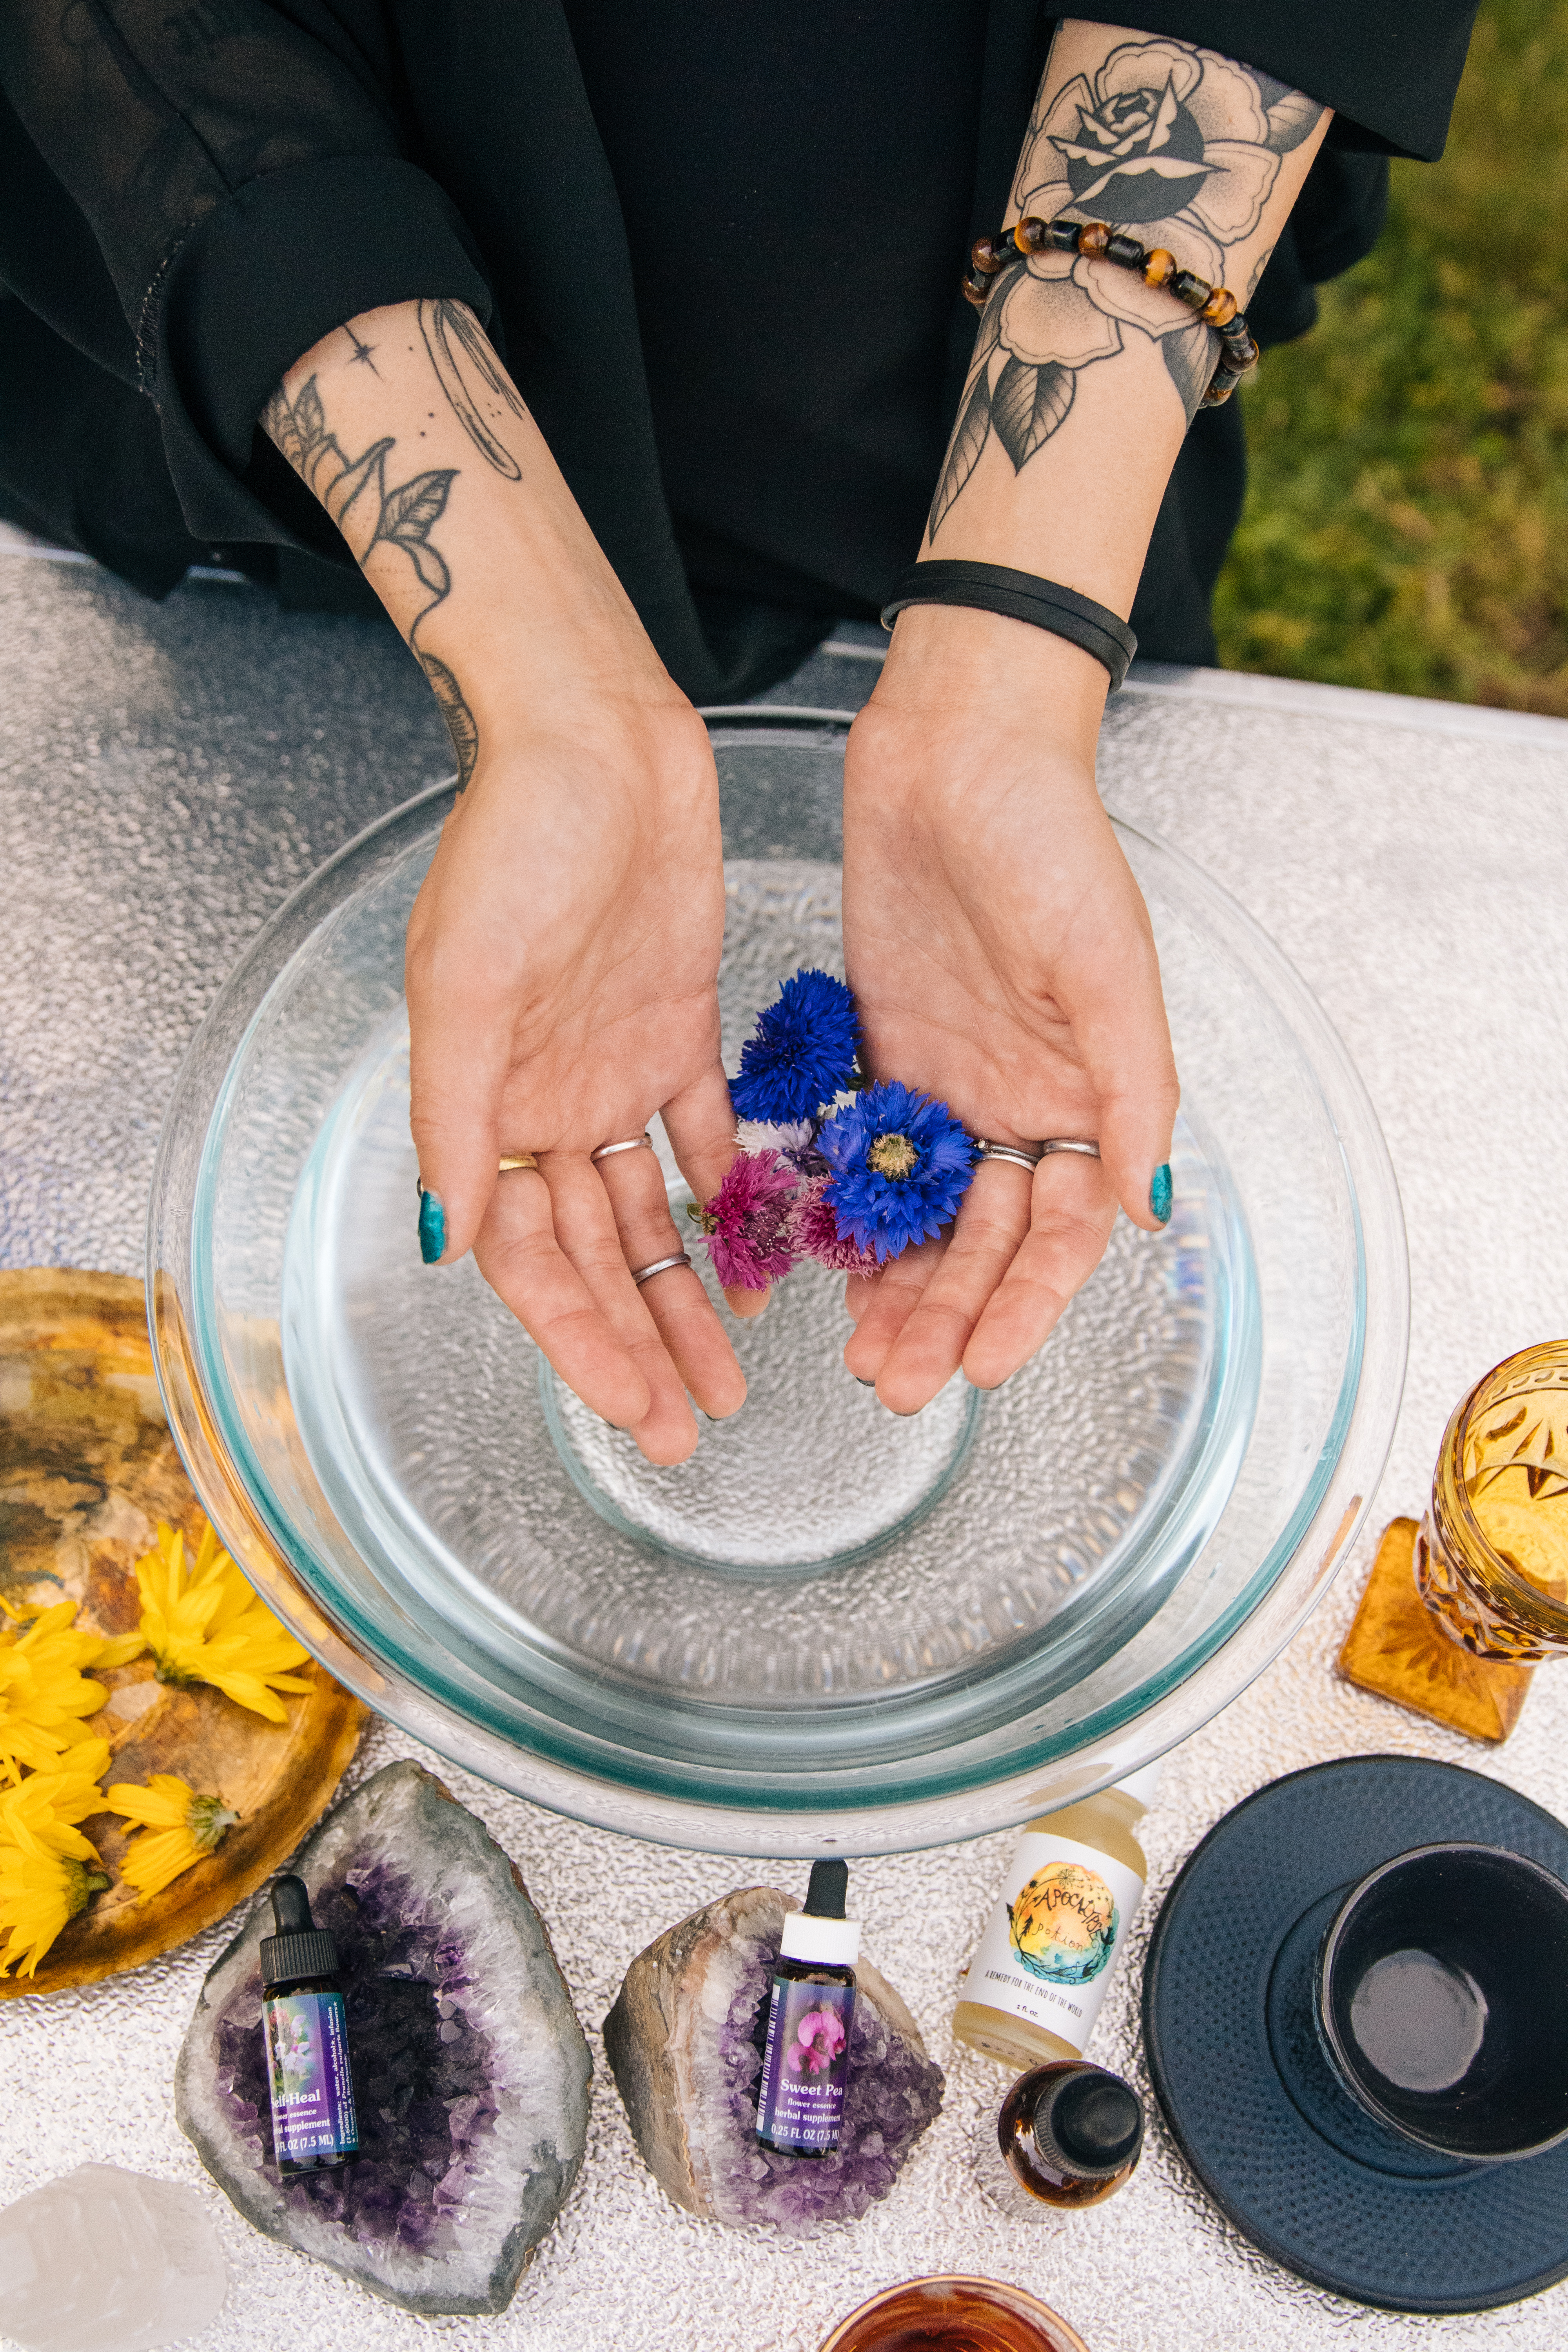 hands-dropping-whole-cornflower-blossoms-into-bowl-of-water-with-flower-essence-making-suppplies-around-them